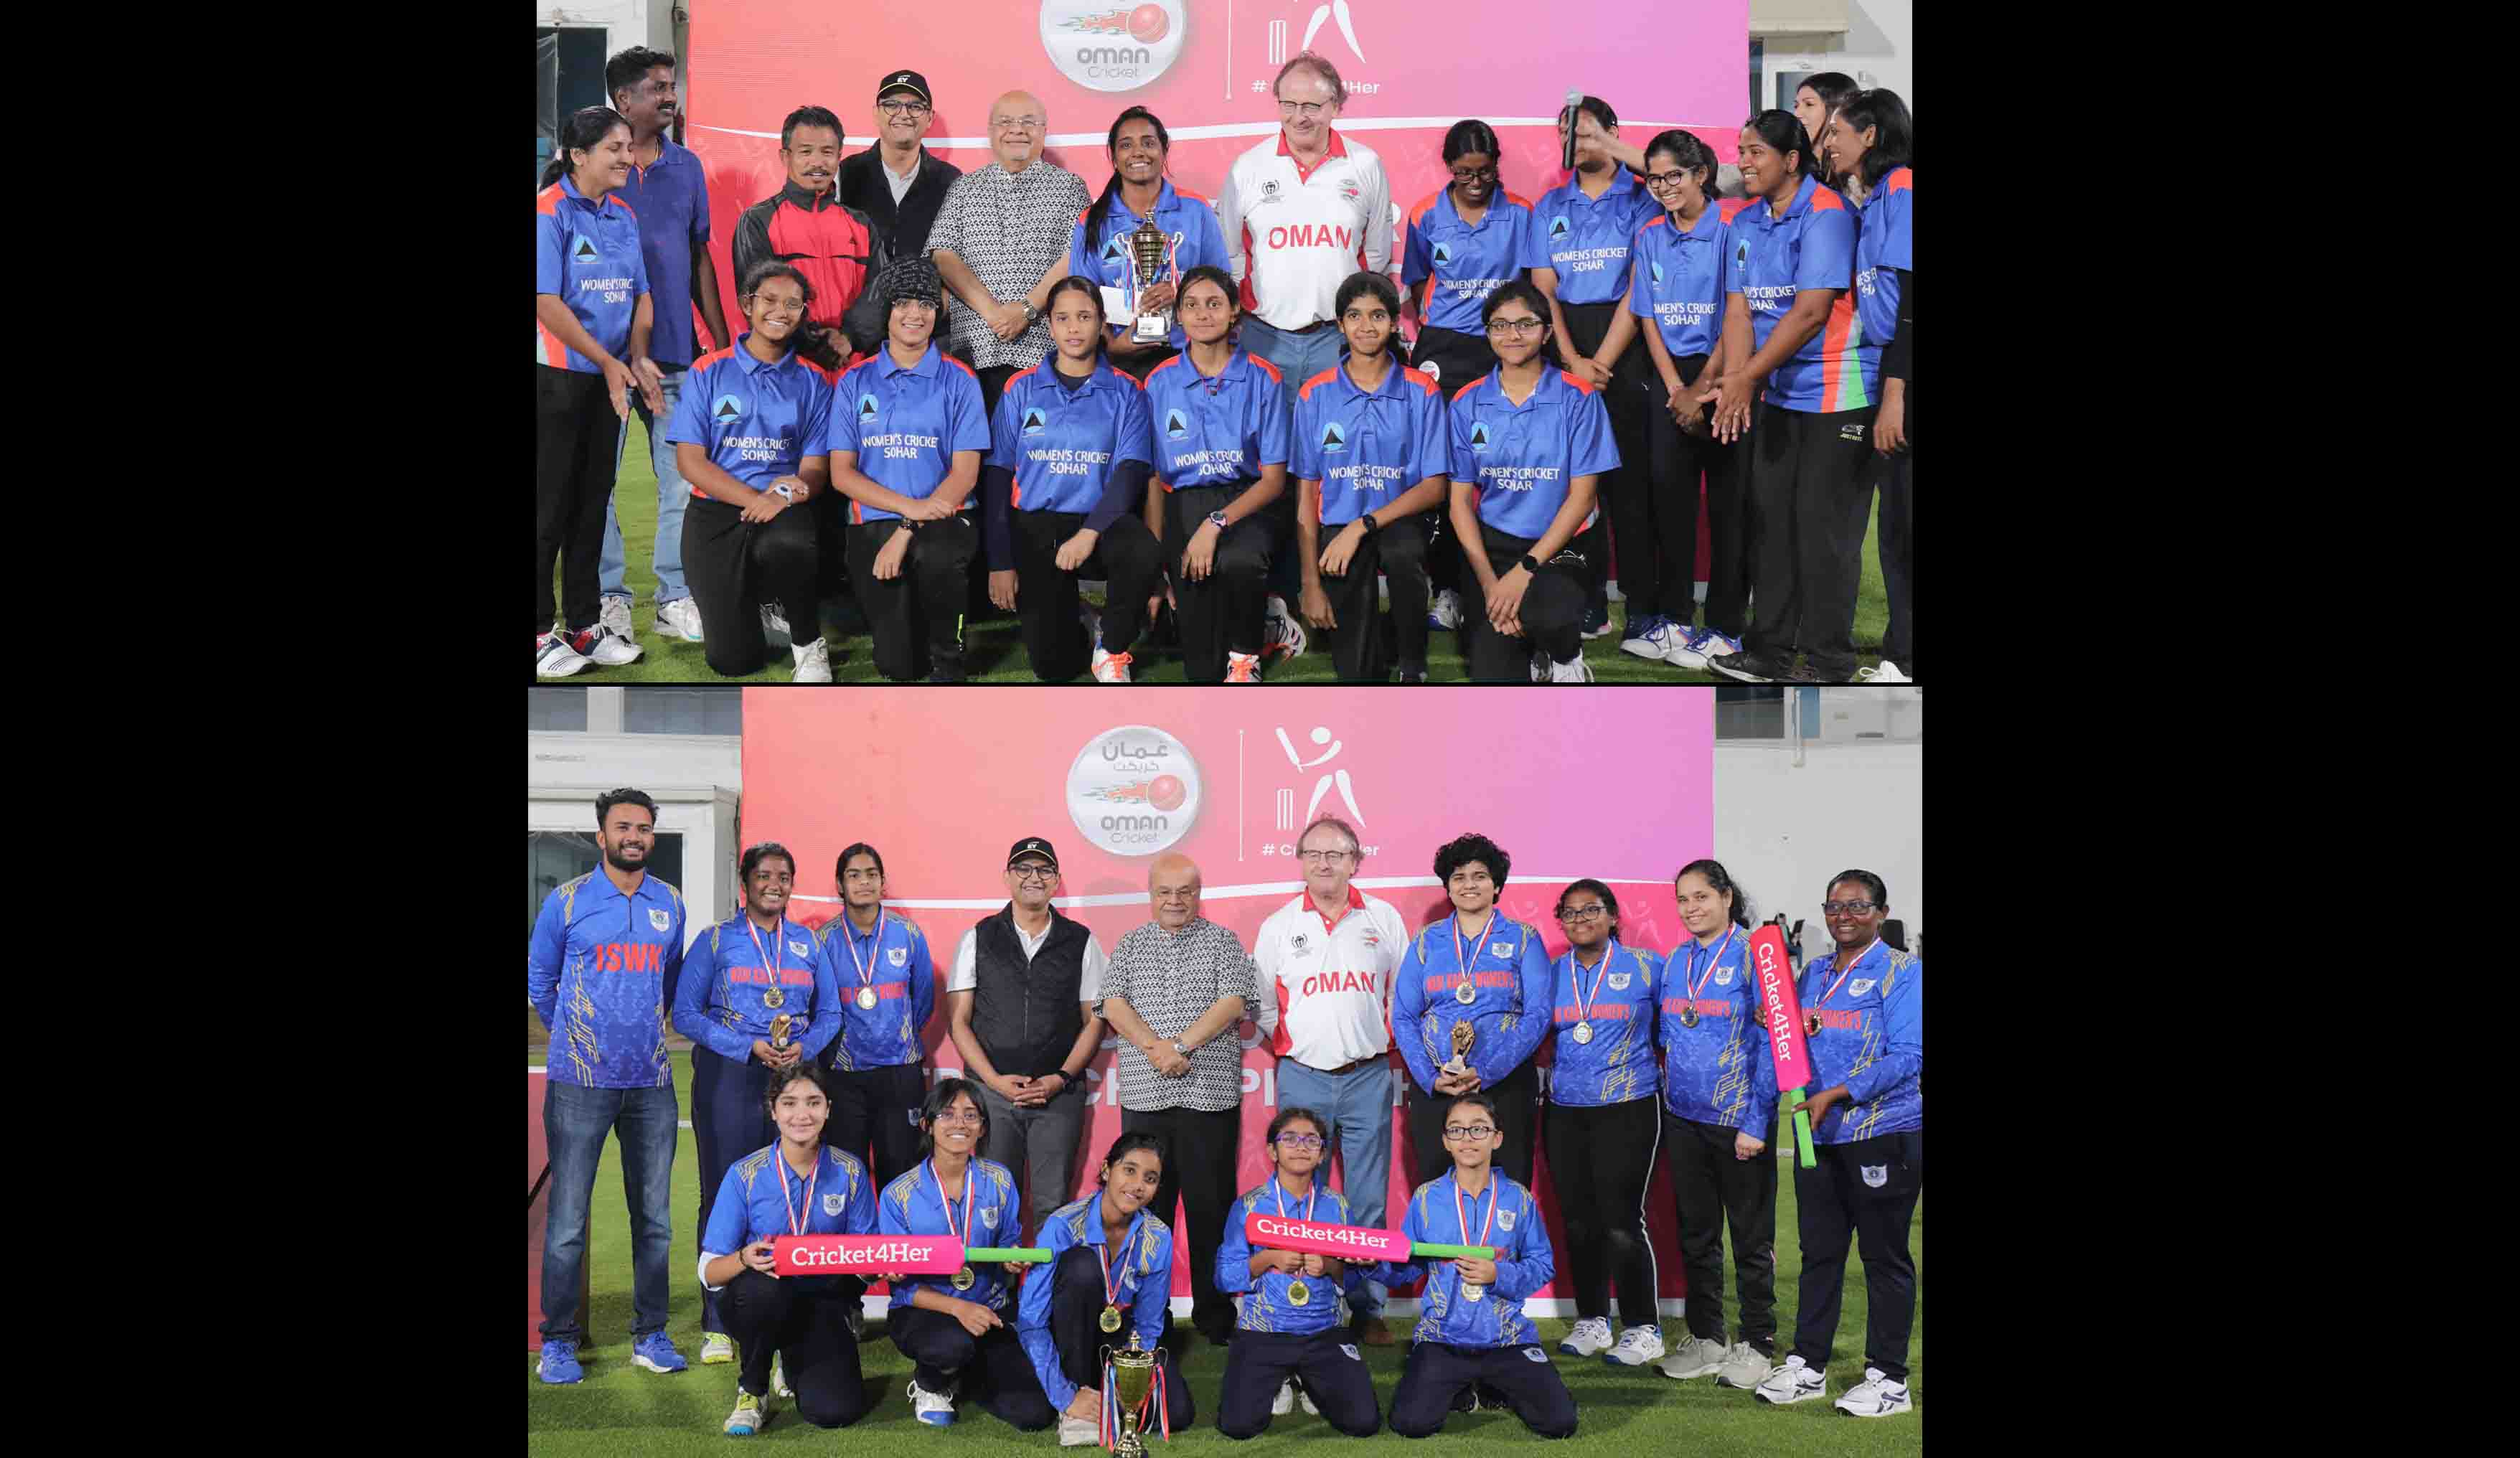 #Cricket4Her programme successfully completes inaugural phase in Oman